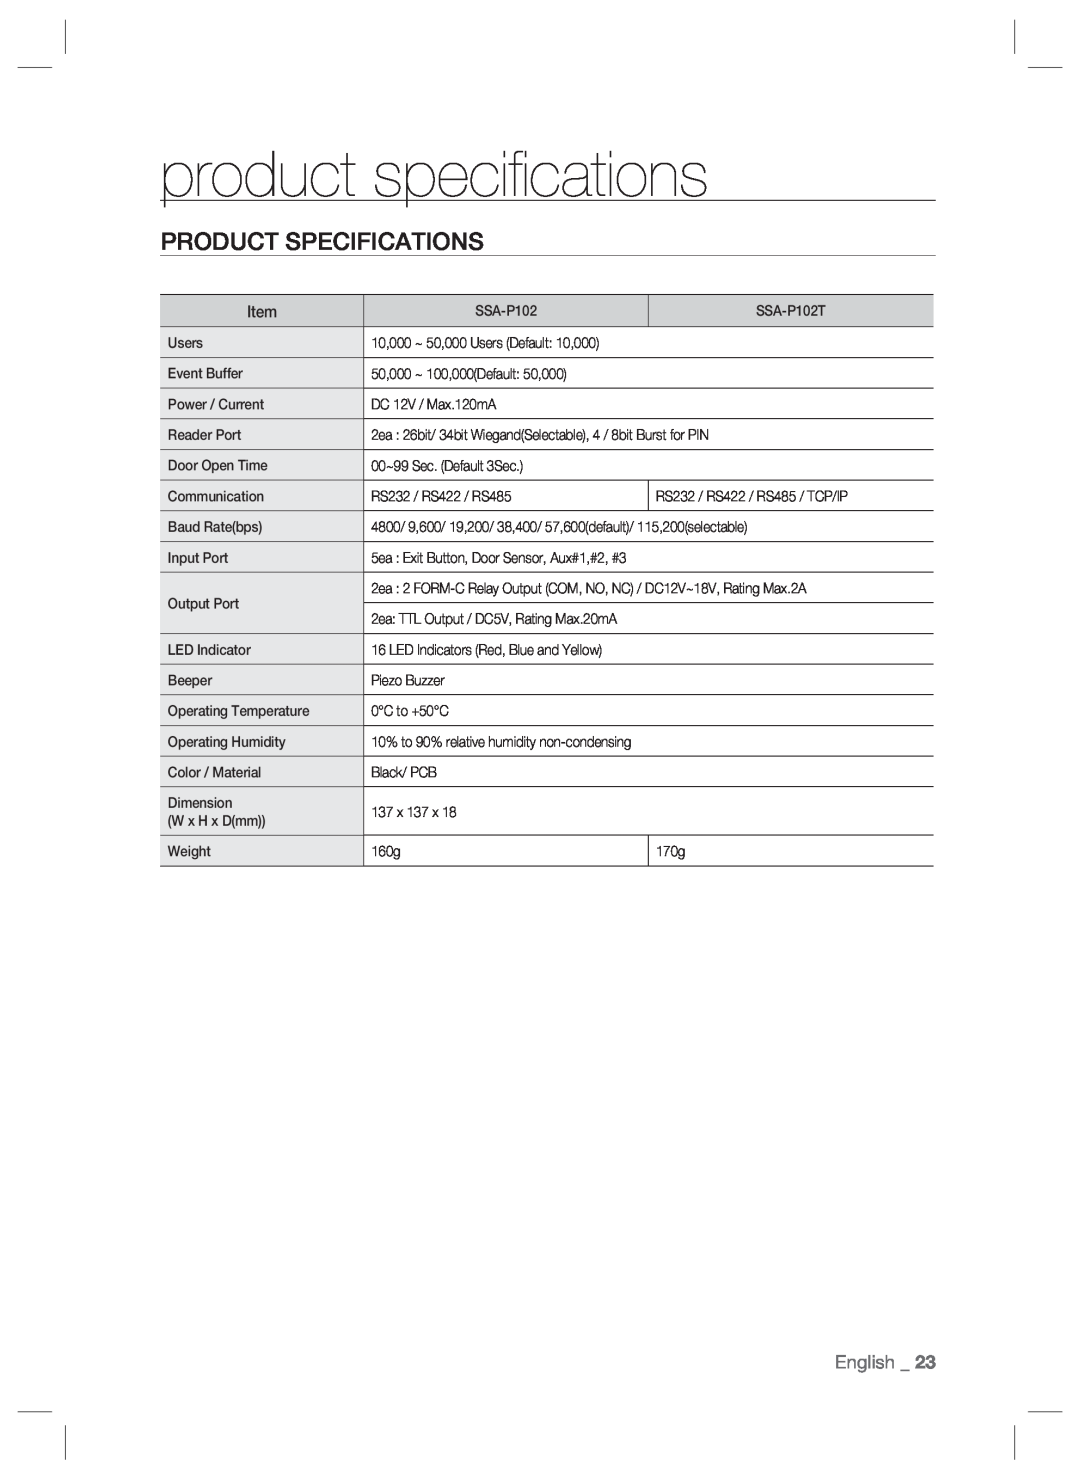 Samsung SSA-P102T user manual product speciﬁcations, Product Specifications, English 